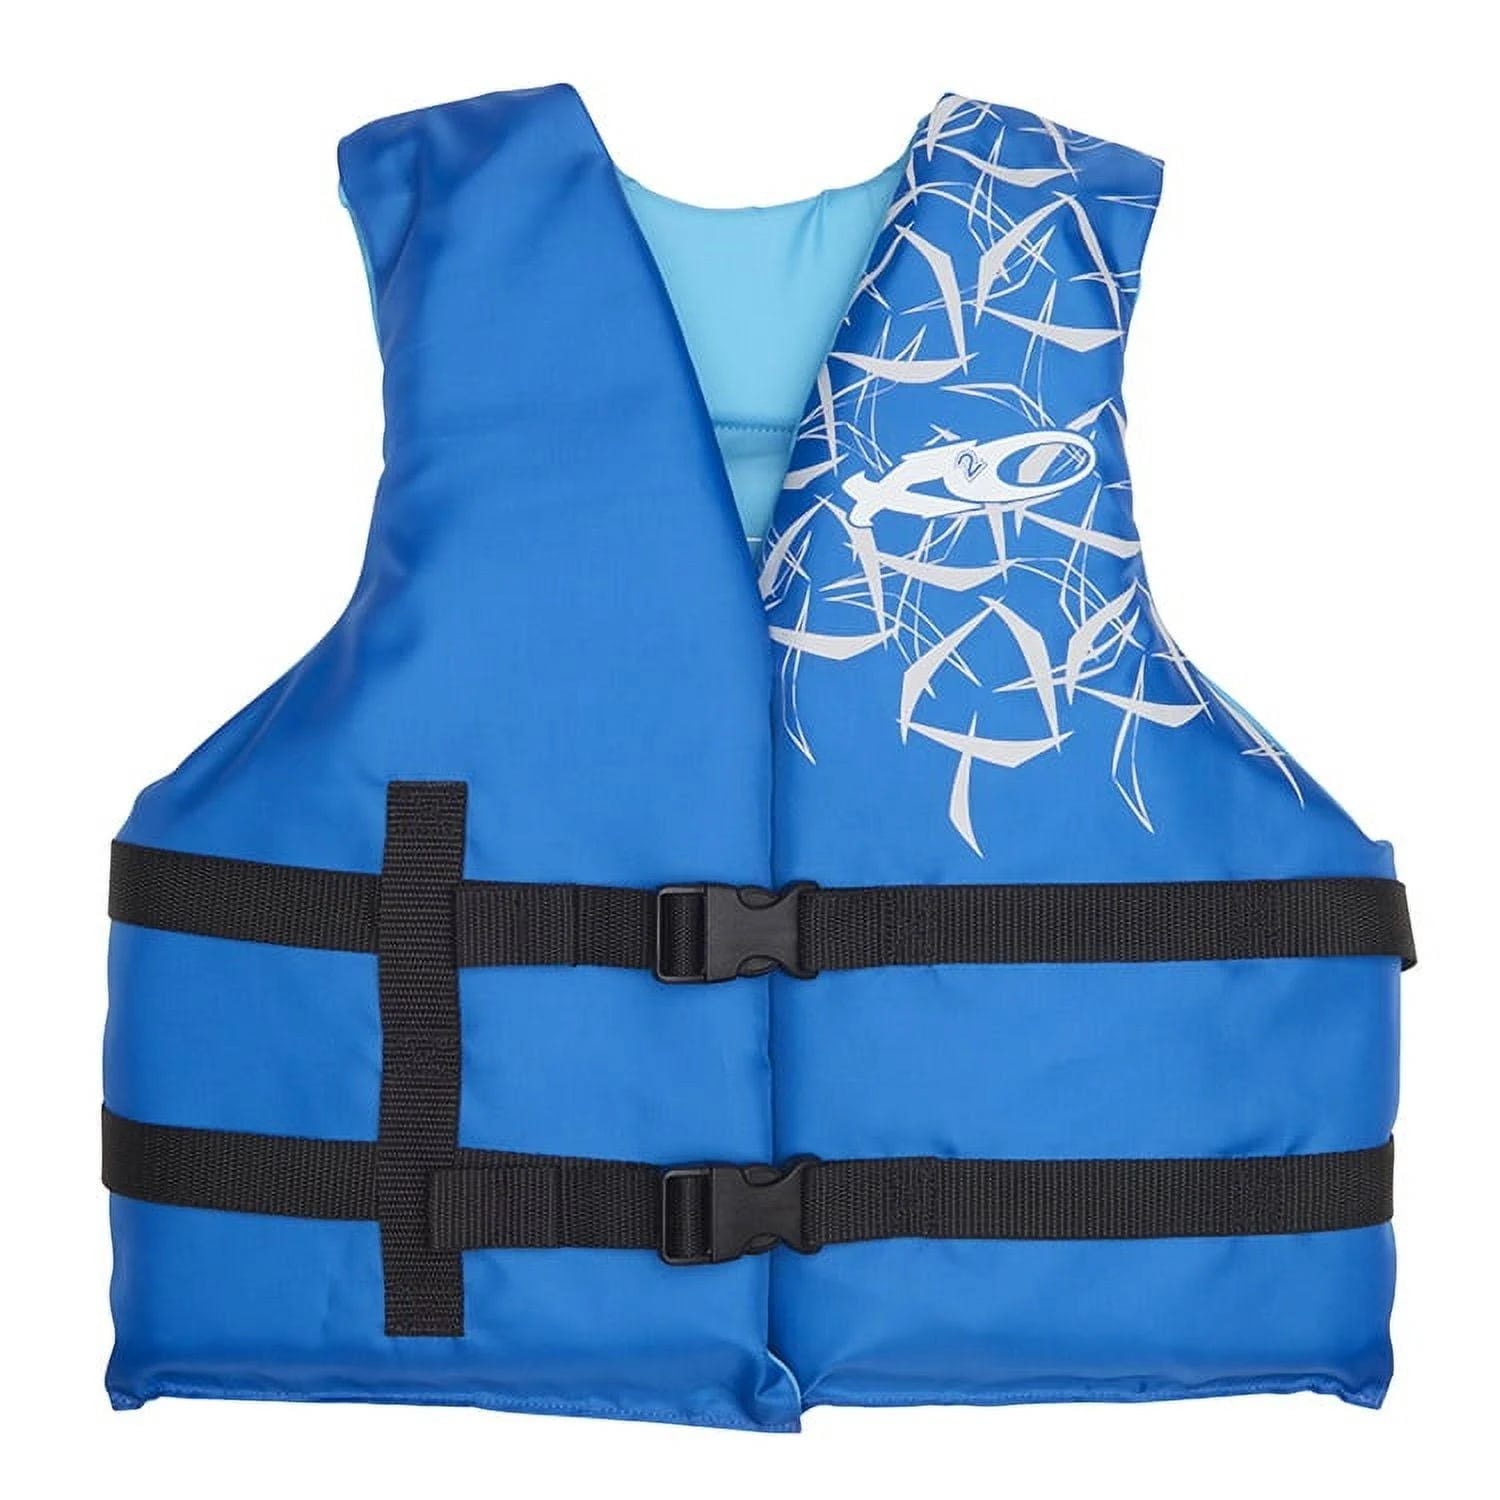 Open-Sided Youth Life Vest for Water Activities | Image